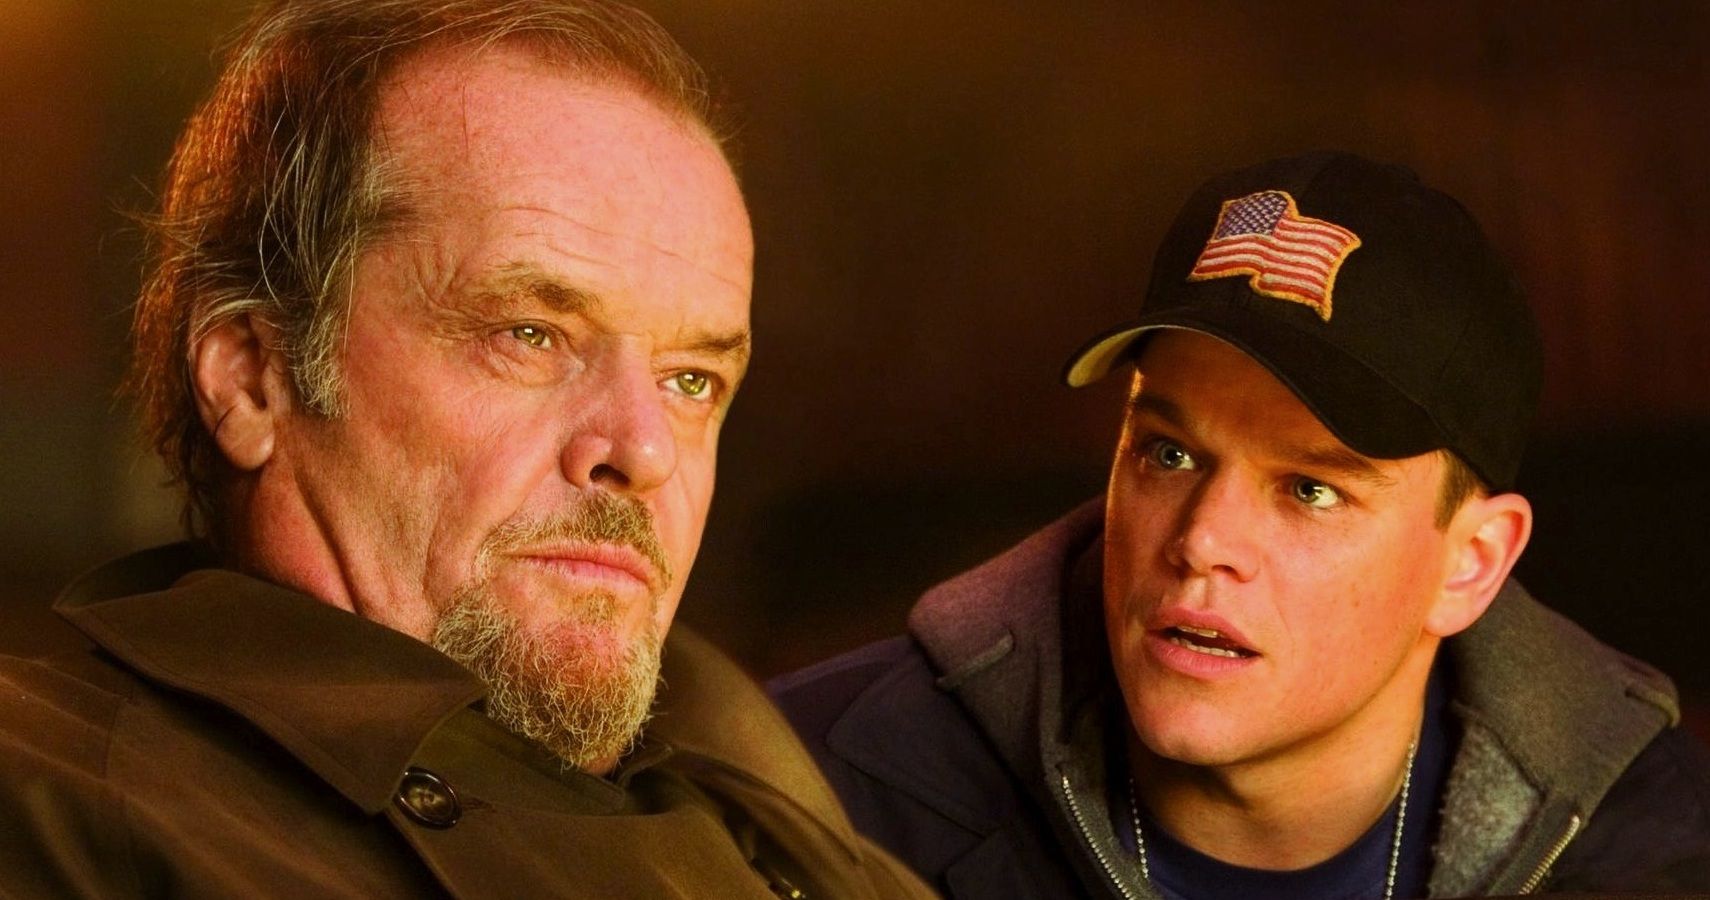 Leo DiCaprio and Jack Nicholson sit talking in The Departed.